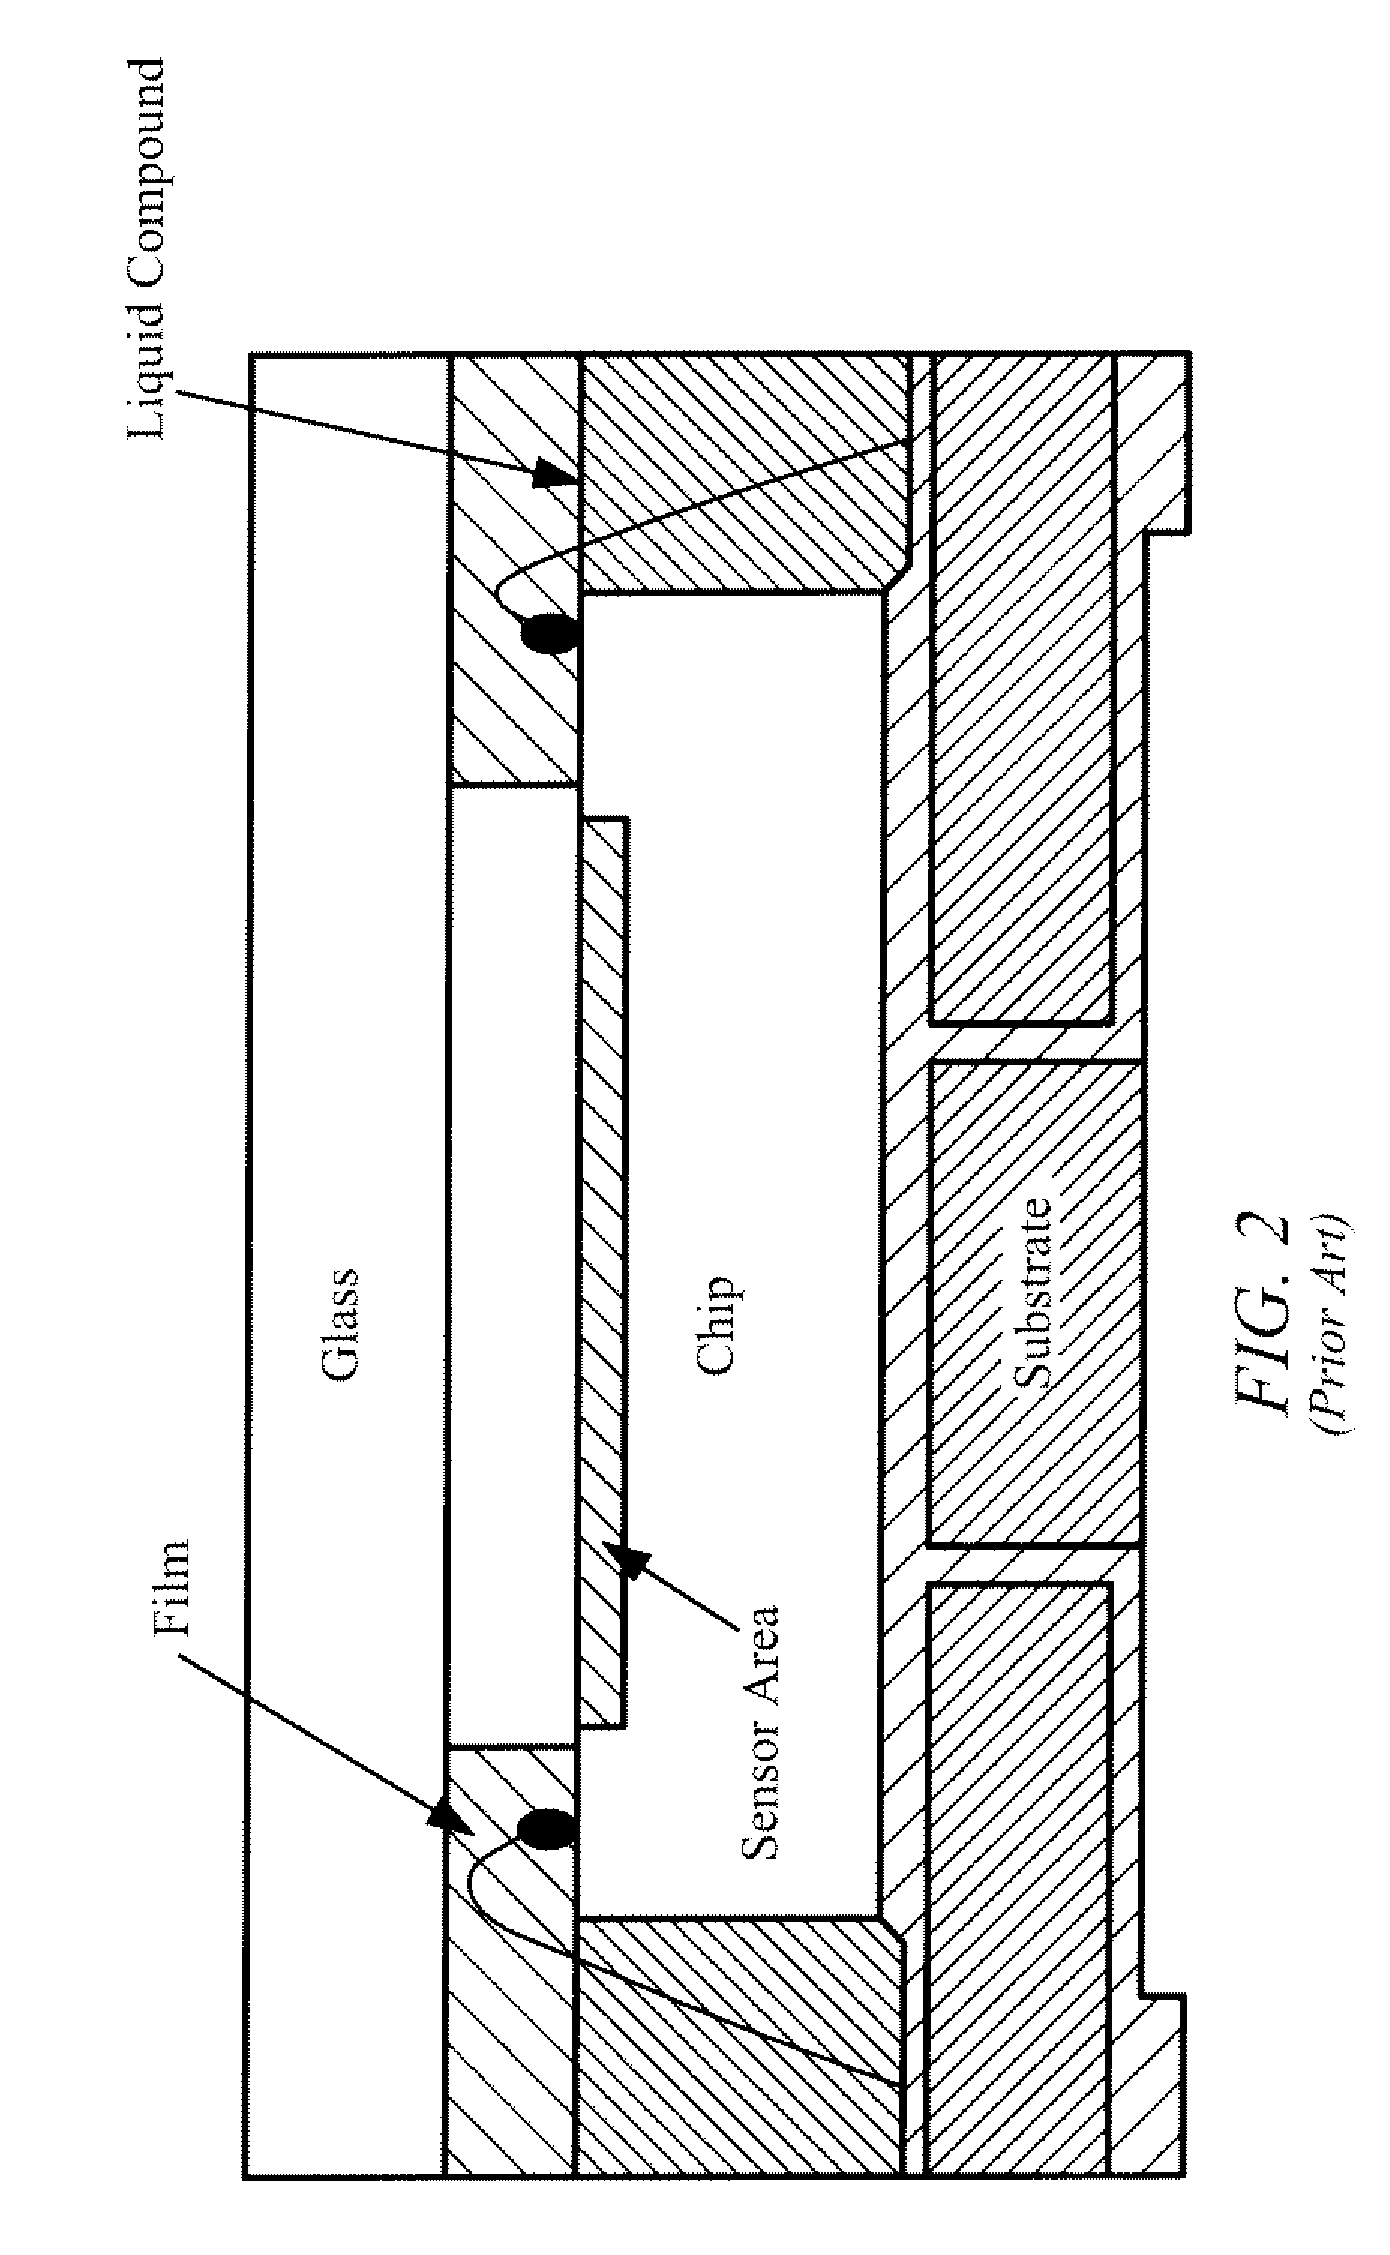 Apparatus and Method For Using Spacer Paste to Package an Image Sensor